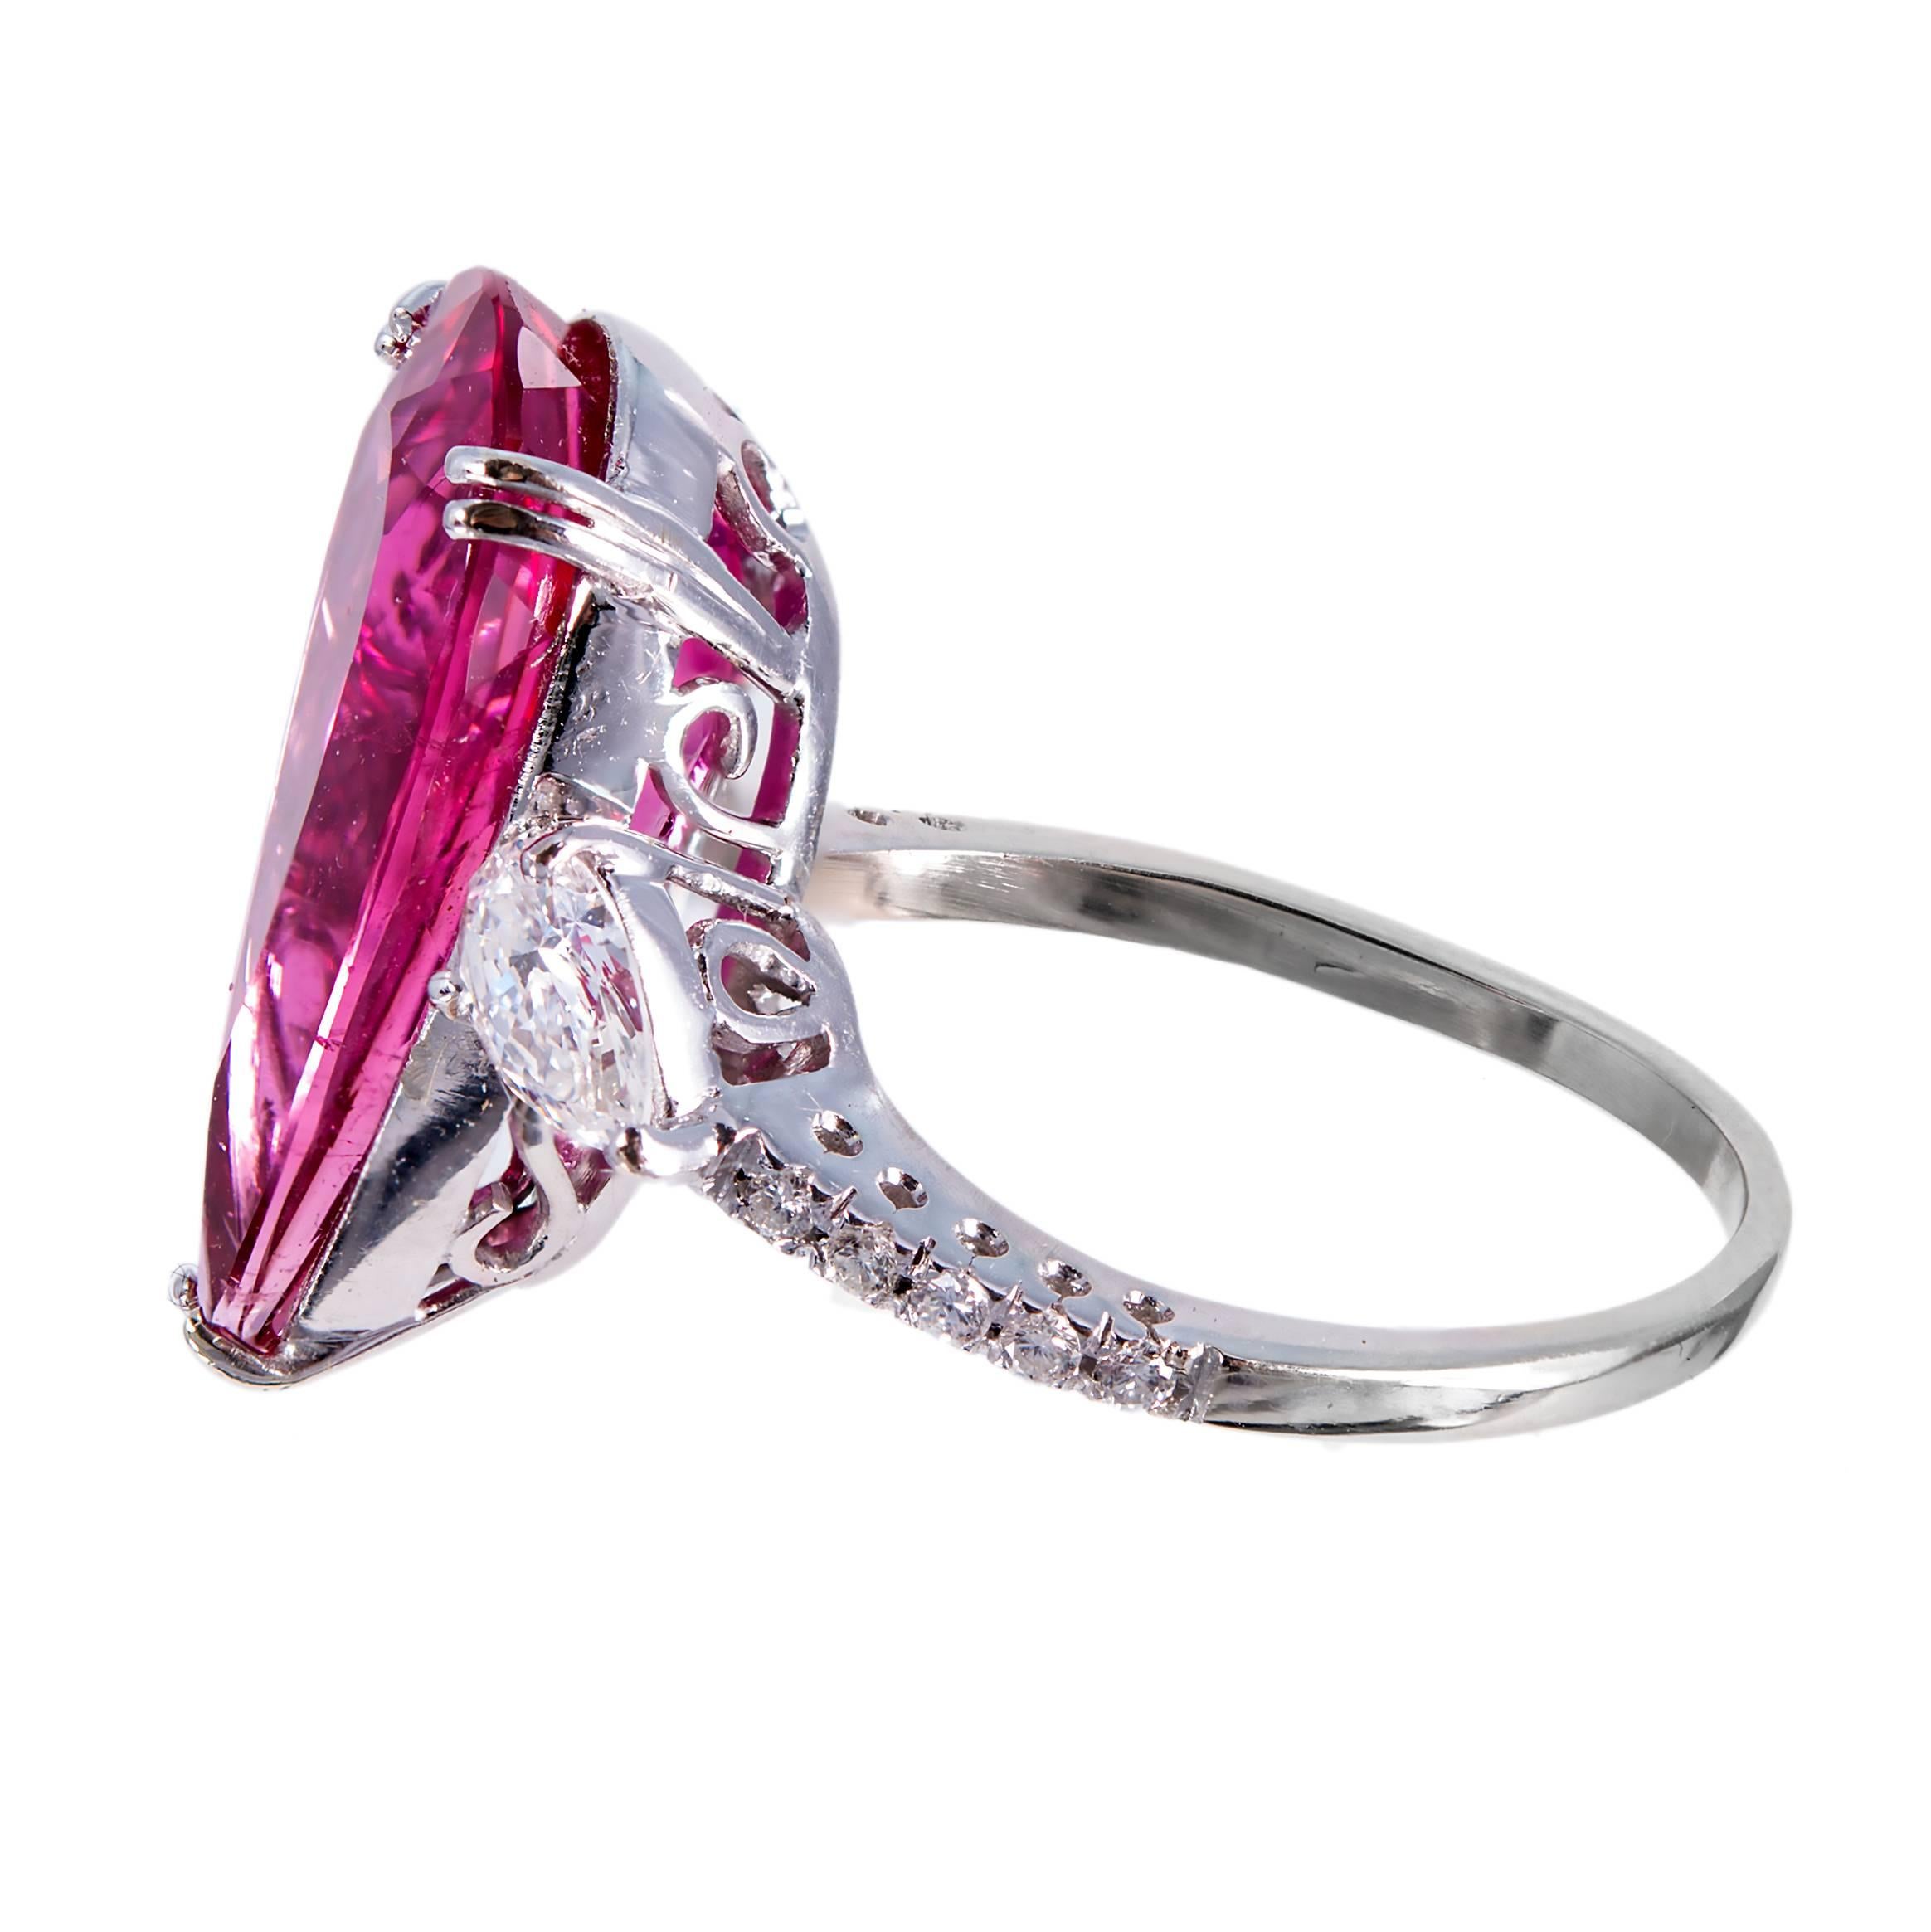 1960's rubelite tourmaline and diamond cocktail ring. Elongated pink pear shape Rubelite Tourmaline with two pear shaped side diamonds, accented with 10 round diamonds.

1 pink red Rubelite Tourmaline, approx. total weight 6.55cts, moderate